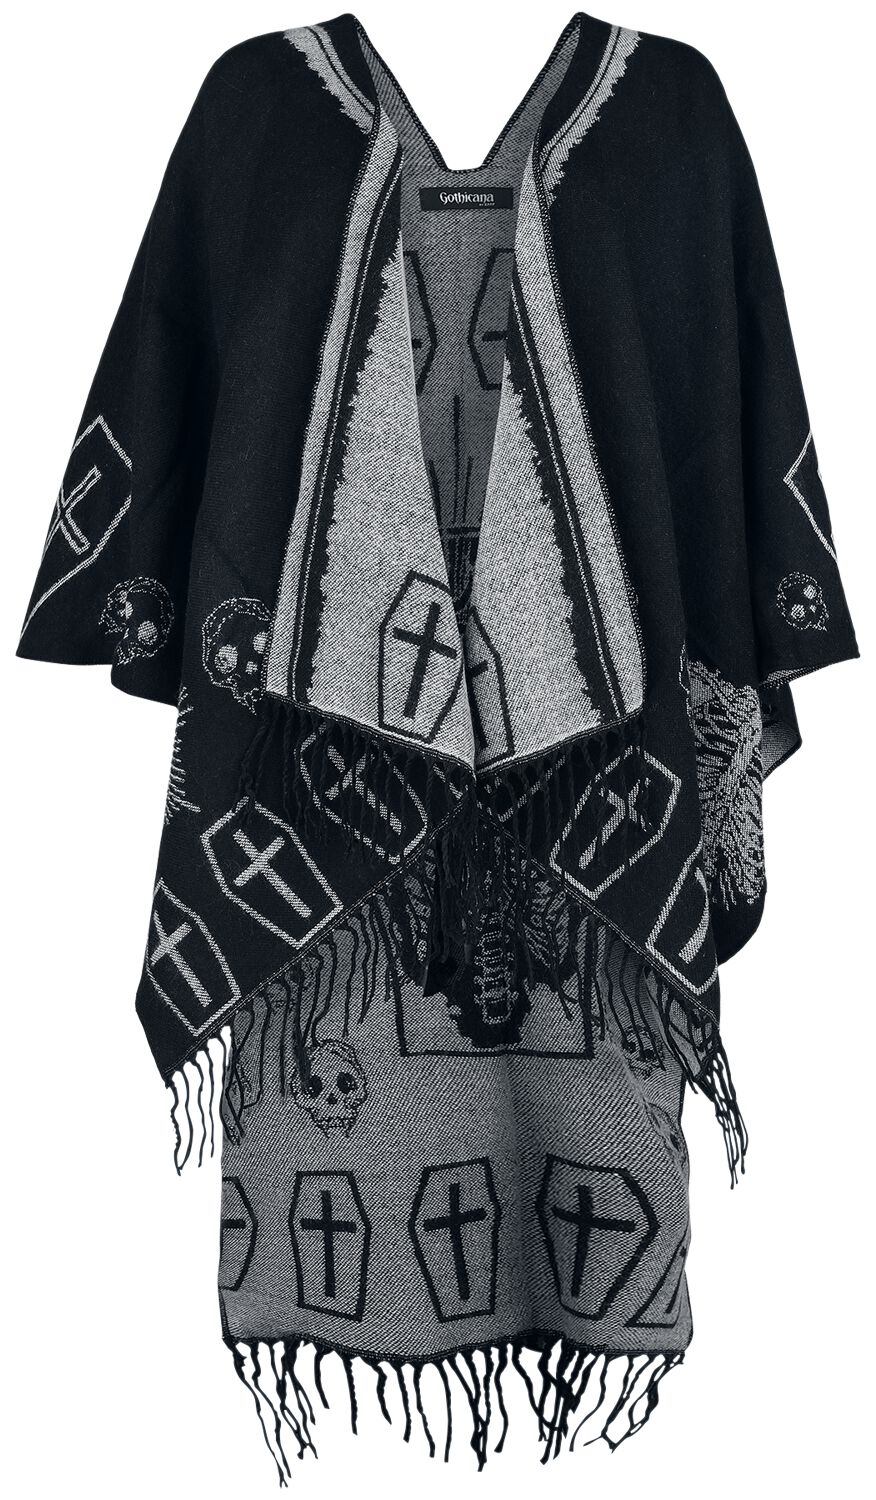 Cardigan Gothic de Gothicana by EMP - Skull and Coffin Poncho - Standard - pour Femme - noir